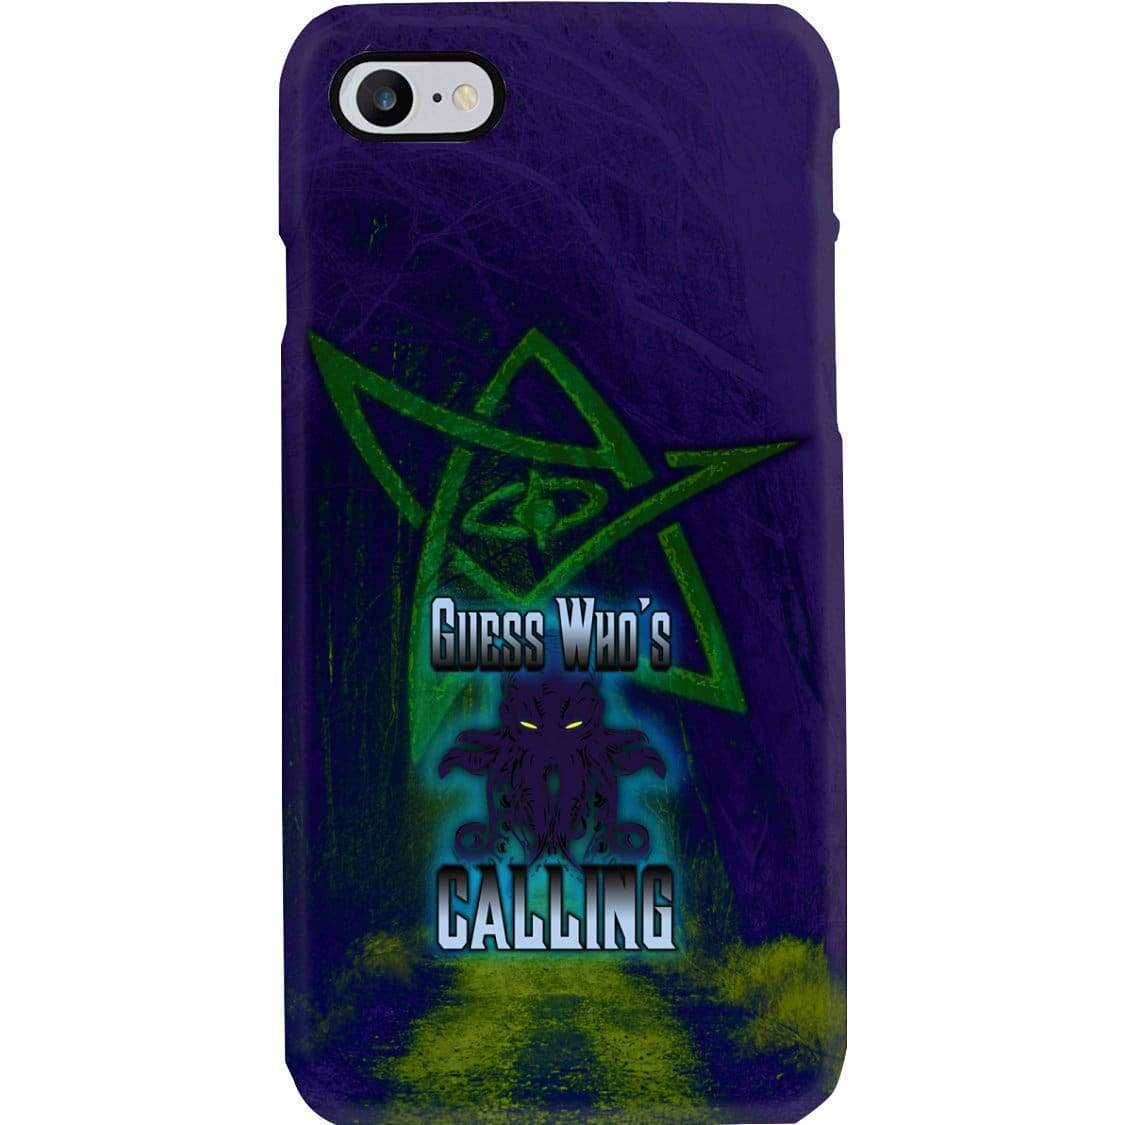 Cthulhu - Guess Who’s Calling Phone Case - Snap * iPhone * Samsung * - iPhone 8 Case / Gloss / Apparel